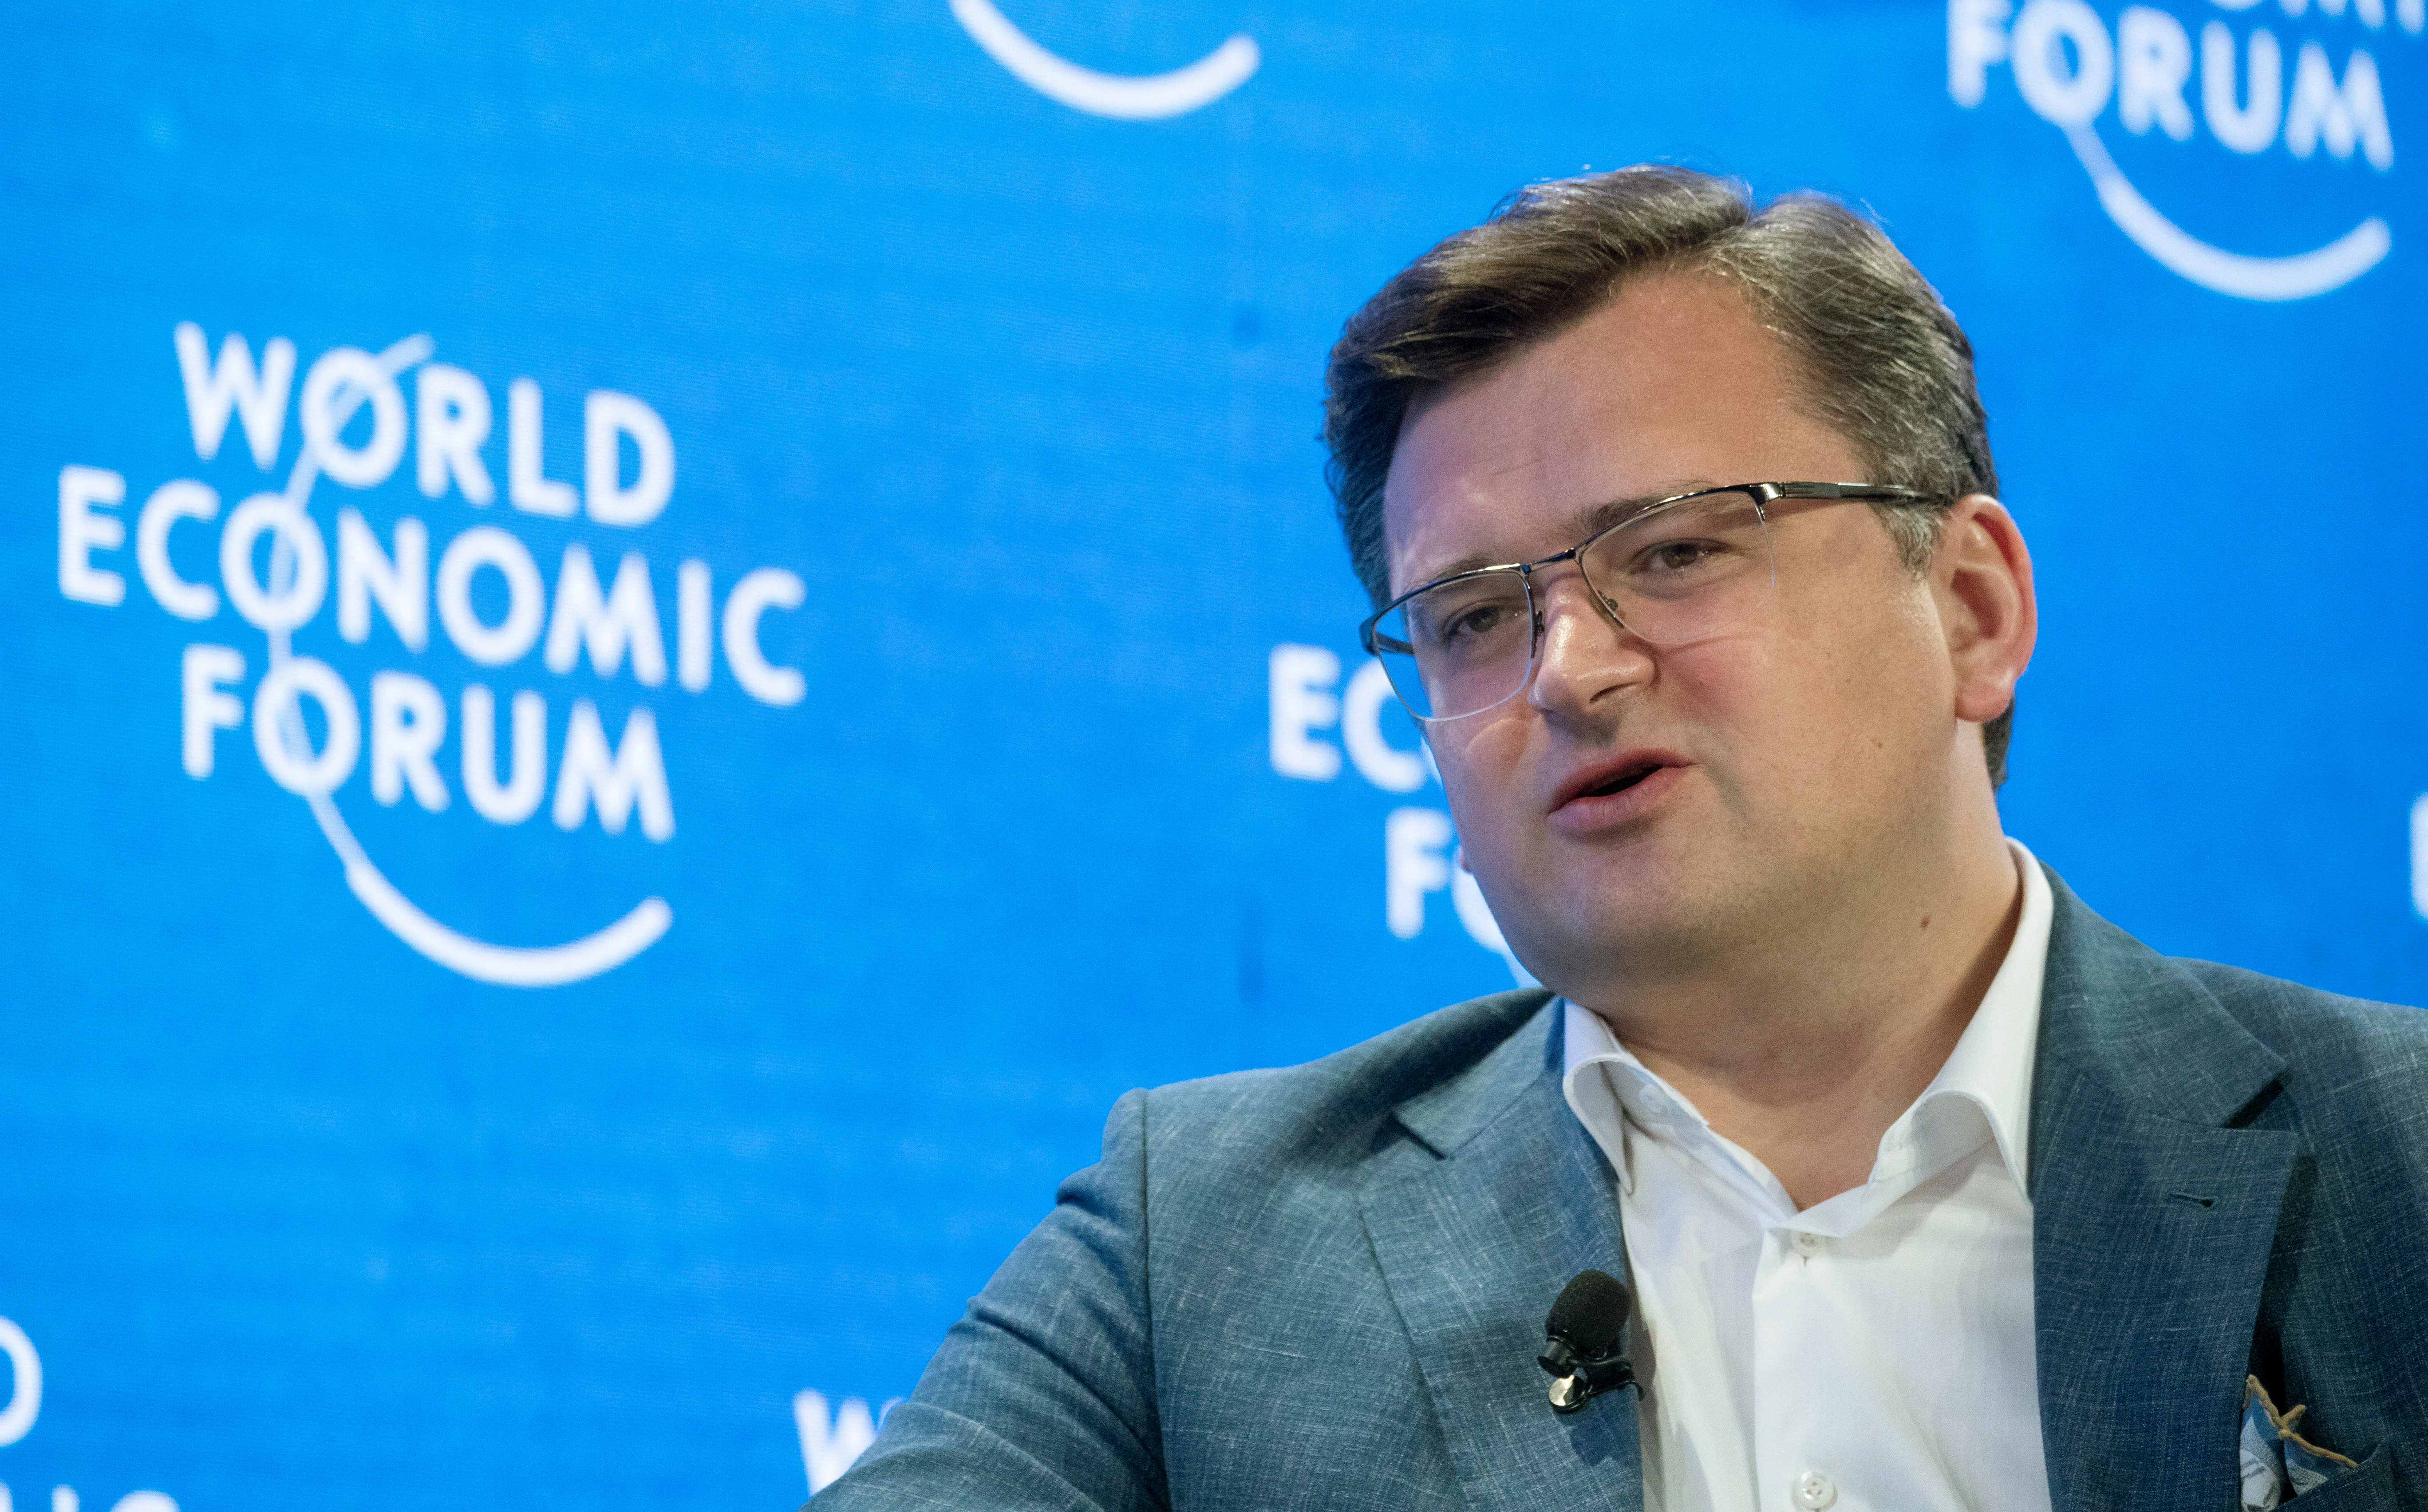 Ukrainian Foreign Minister Kuleba gestures during a discussion WEF 2022 in Davos